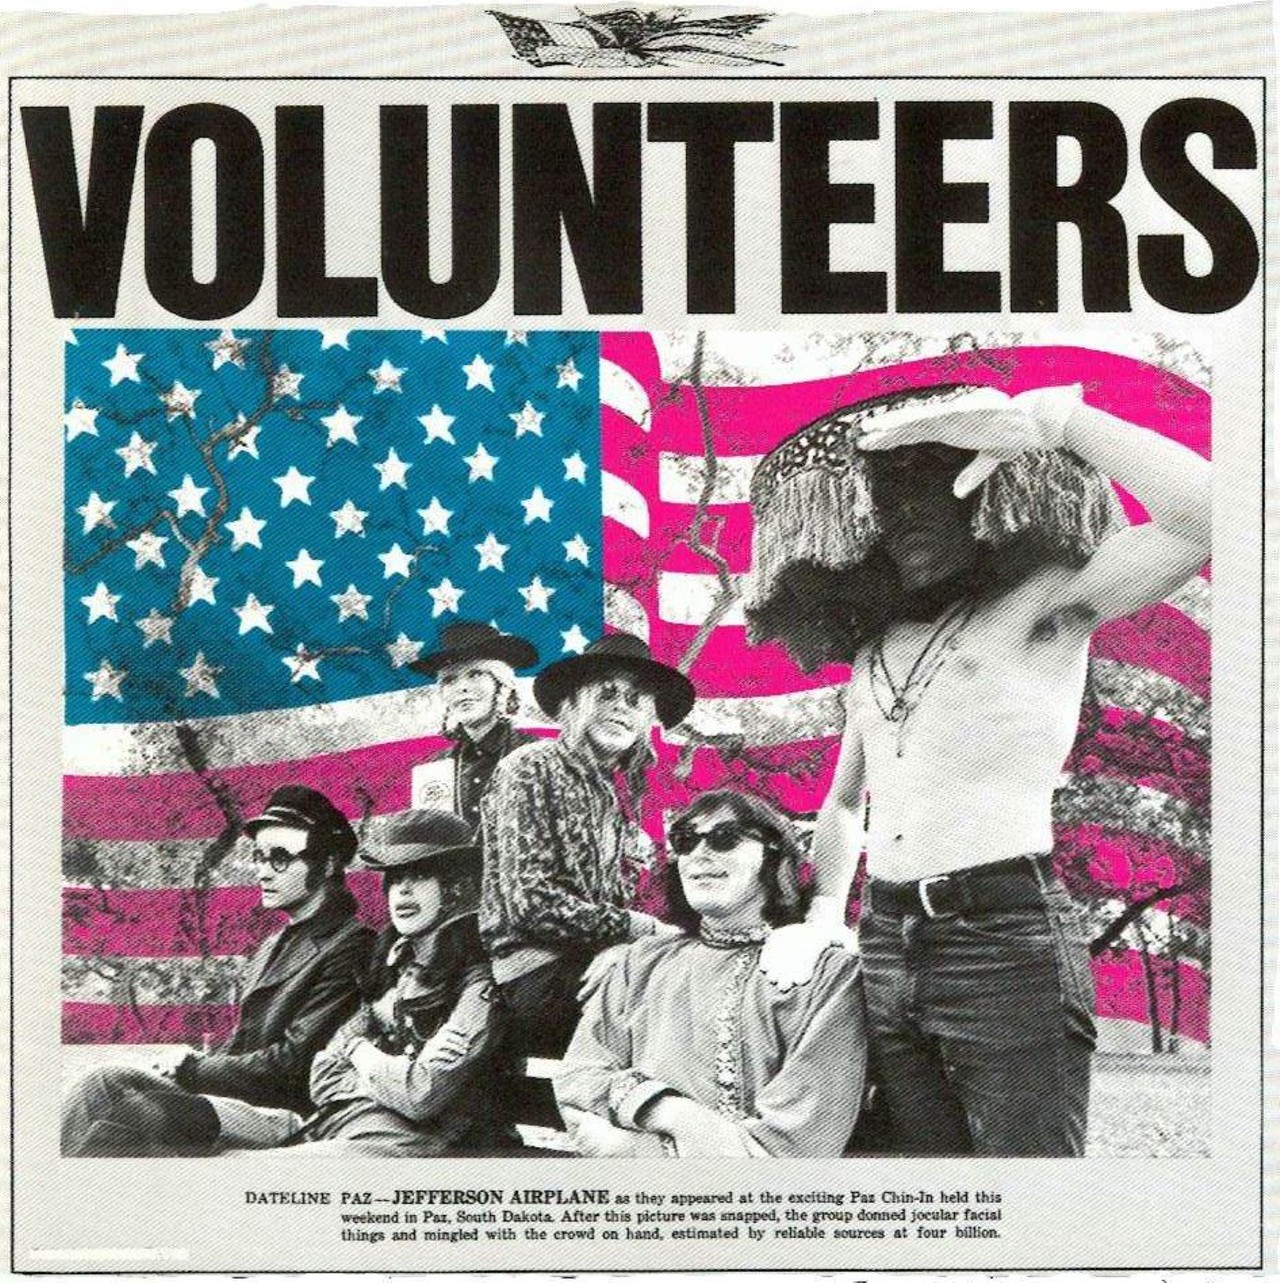 Jefferson Airplane - Volunteers (1969)
Back in the late '60s all you needed to do to create a controversial album was to throw the American flag on the cover of a decidedly anti-war album and toss in the word "motherfucker" somewhere in a song. Add a few pro-anarchism lyrics, a photo of the band wearing disguises to hide their identity and some pro-Black Panther lines and you have a hit.